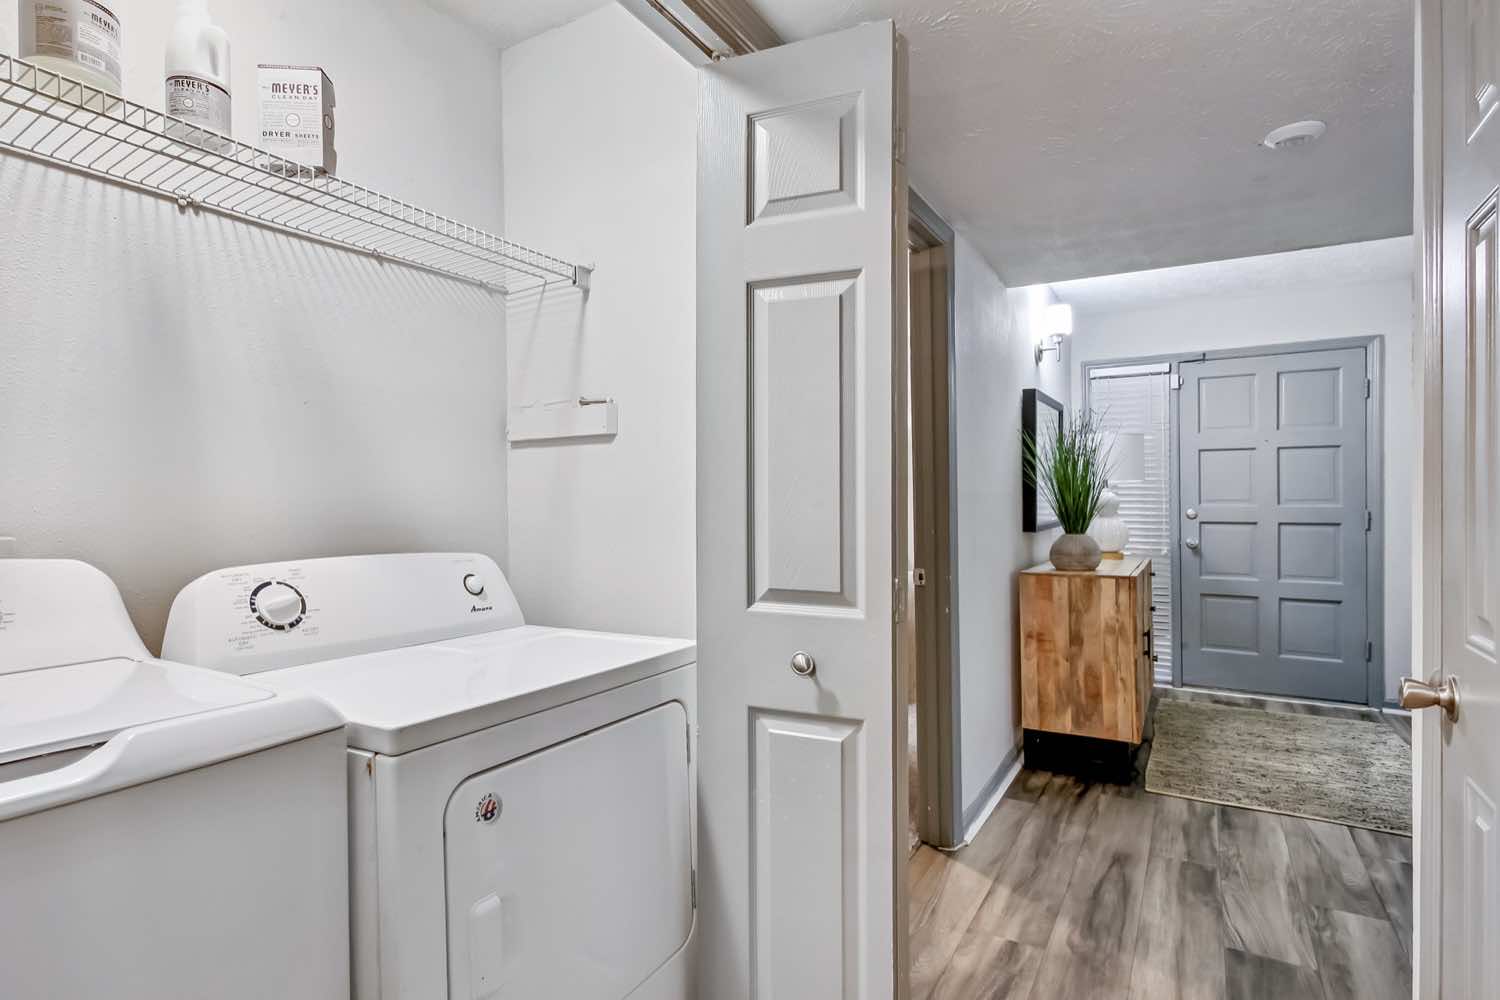 entry way with washer and dryer in laundry room